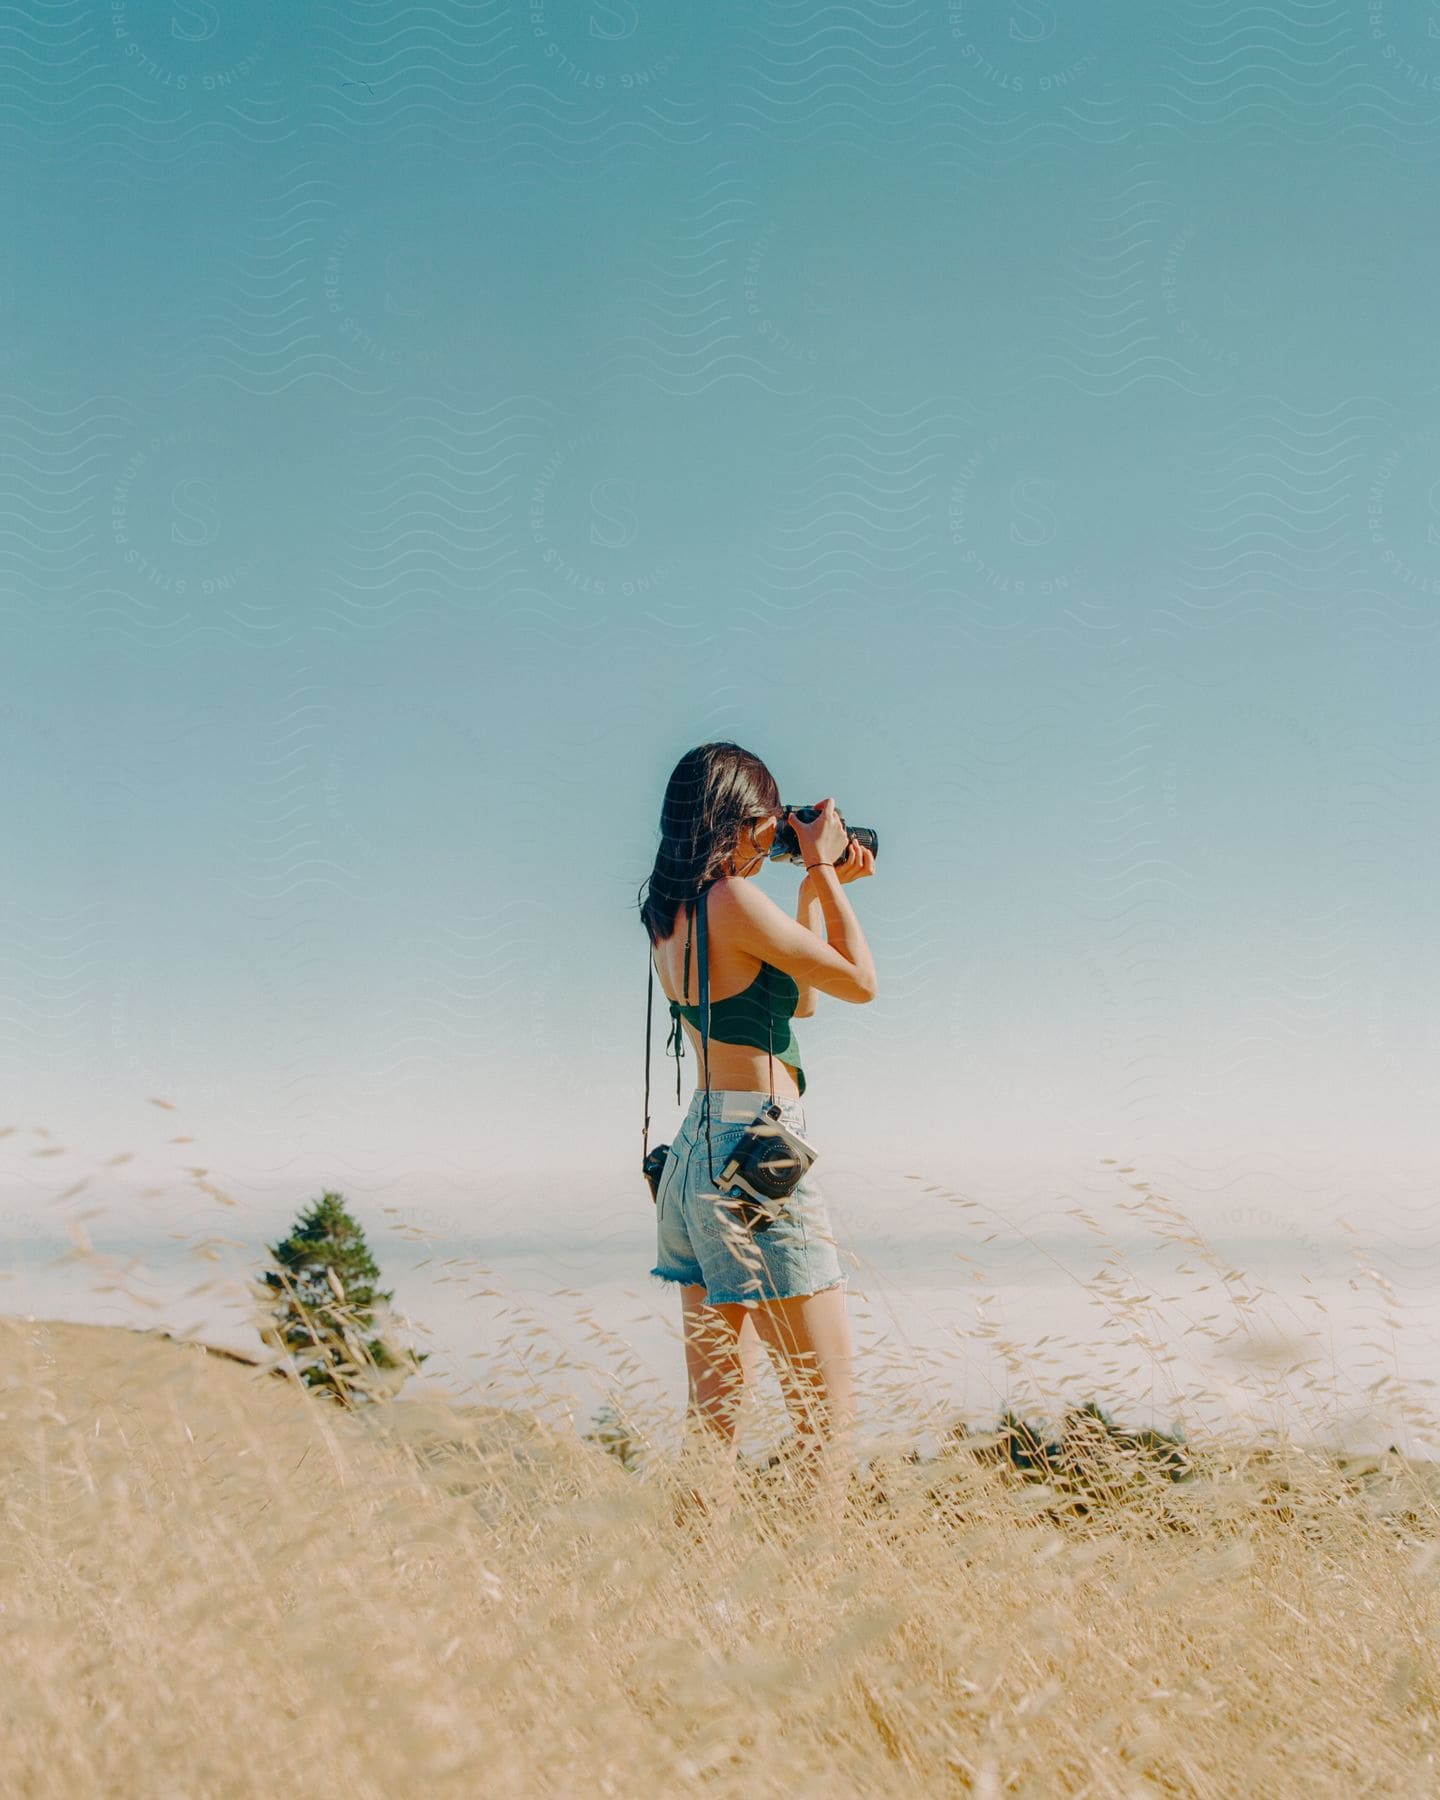 A woman taking a photograph with a camera in a field